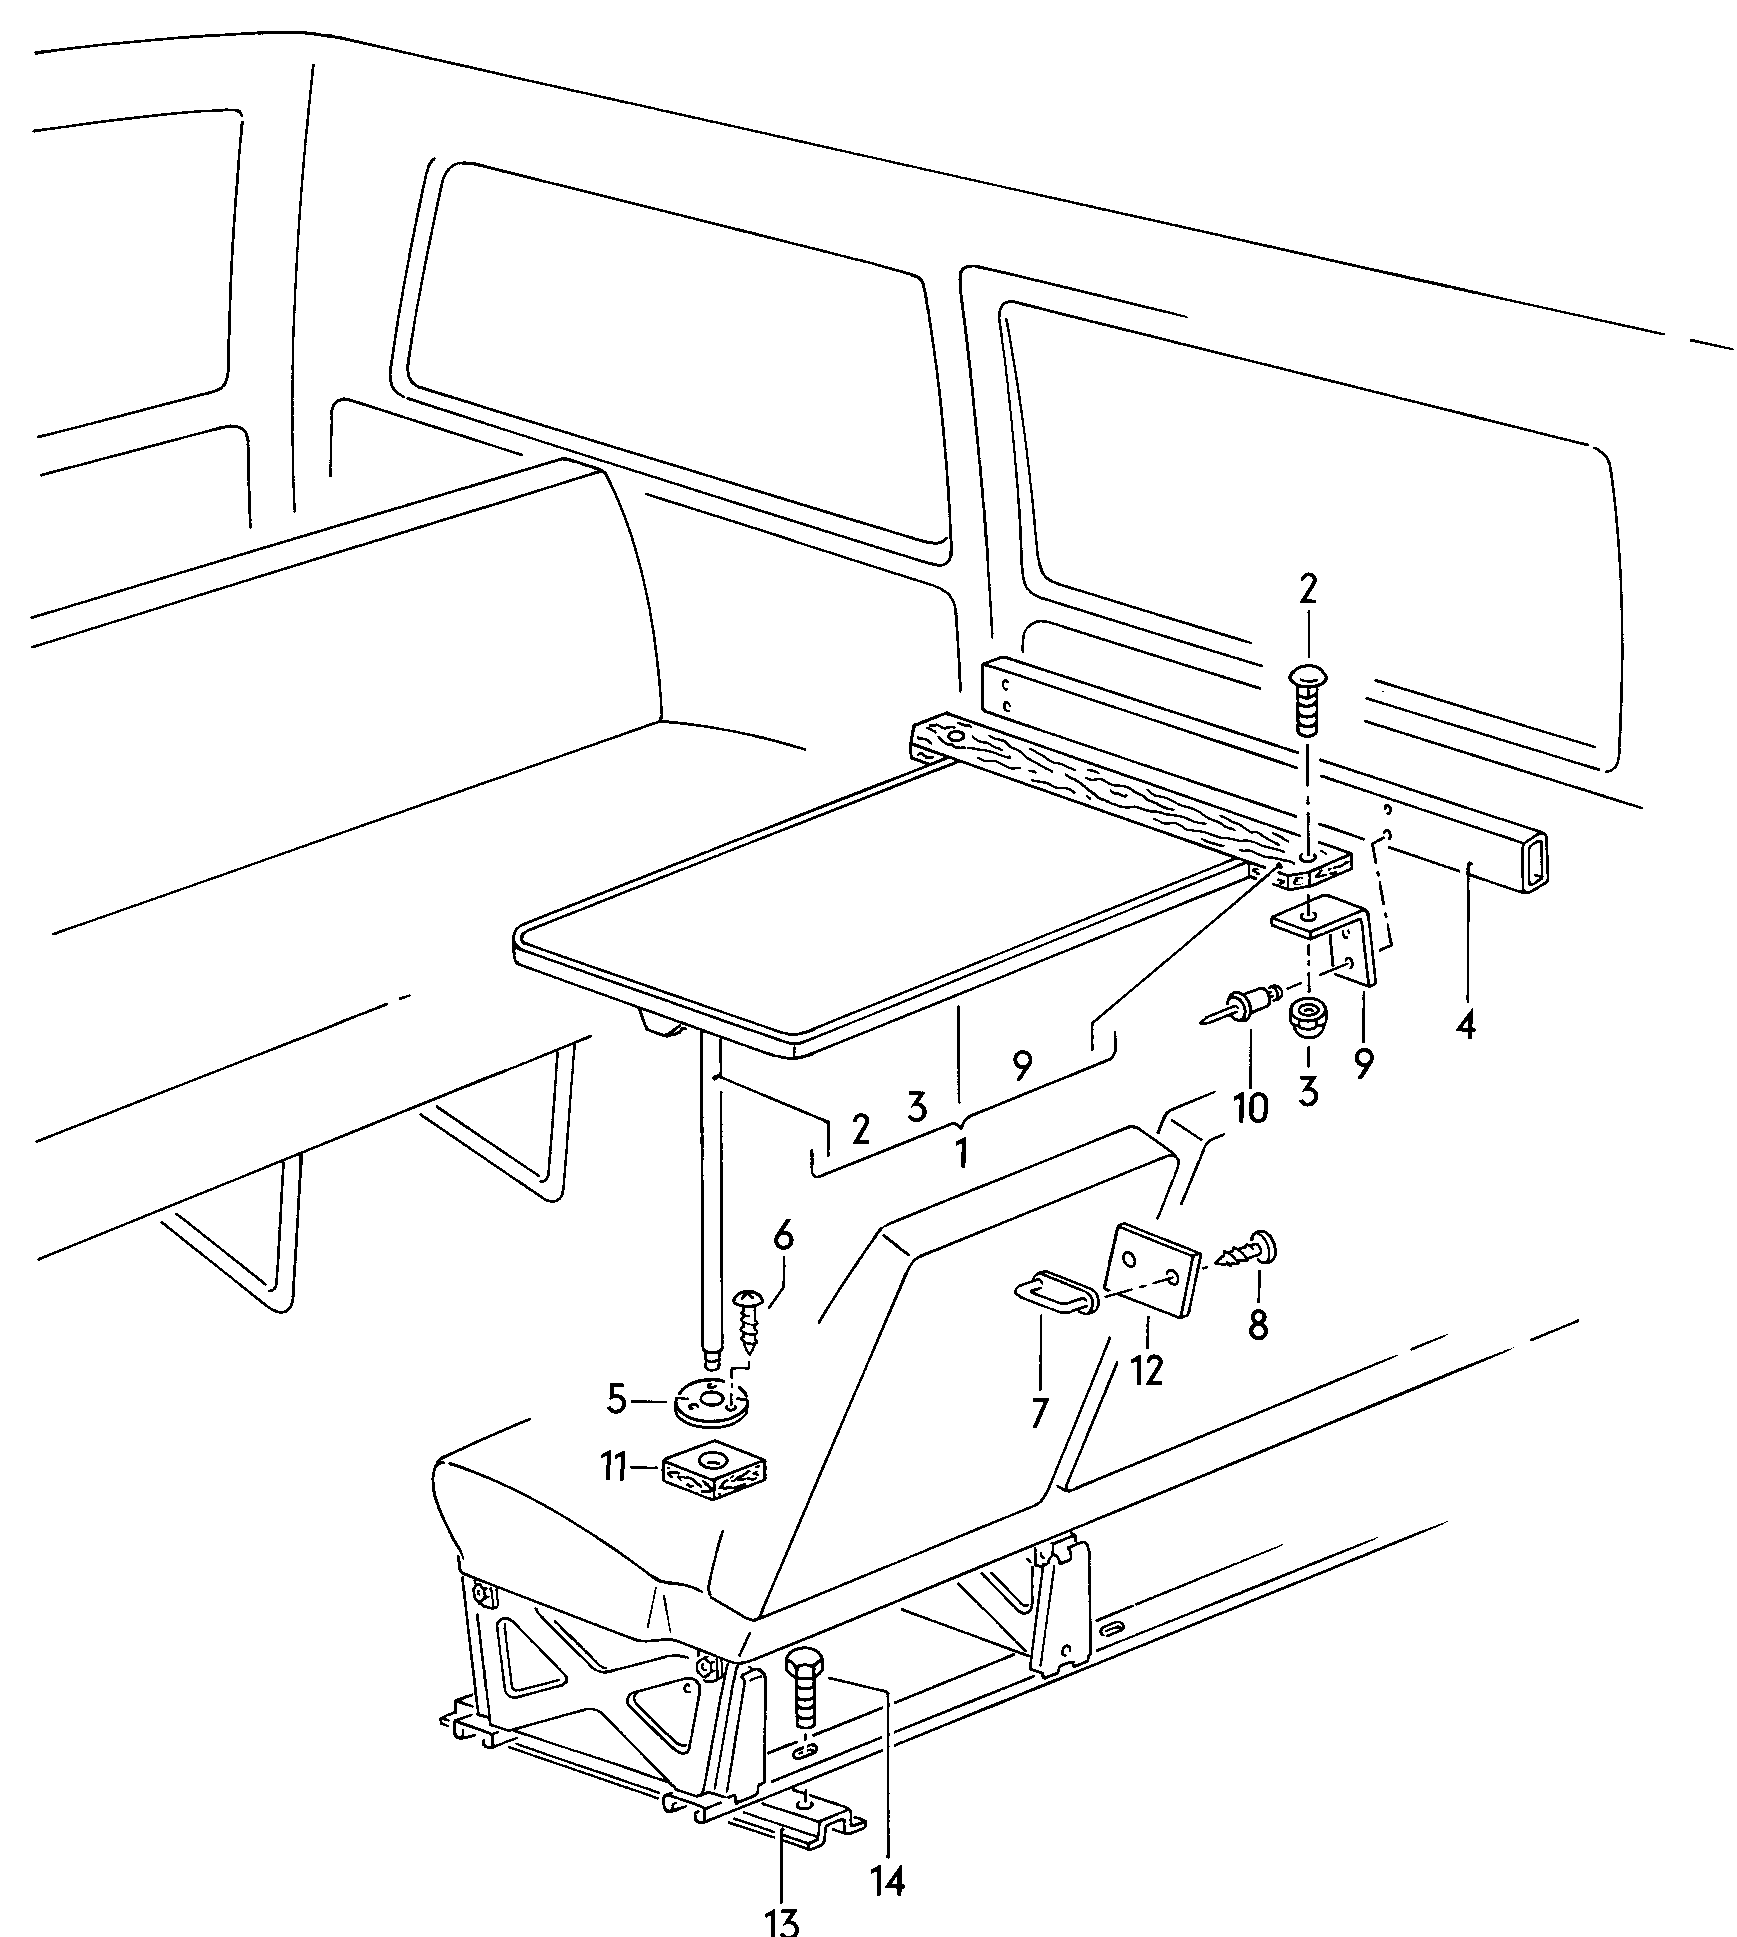 folding table and front<br>bench seat mounting in<br>passenger compartment  - Vanagon - va